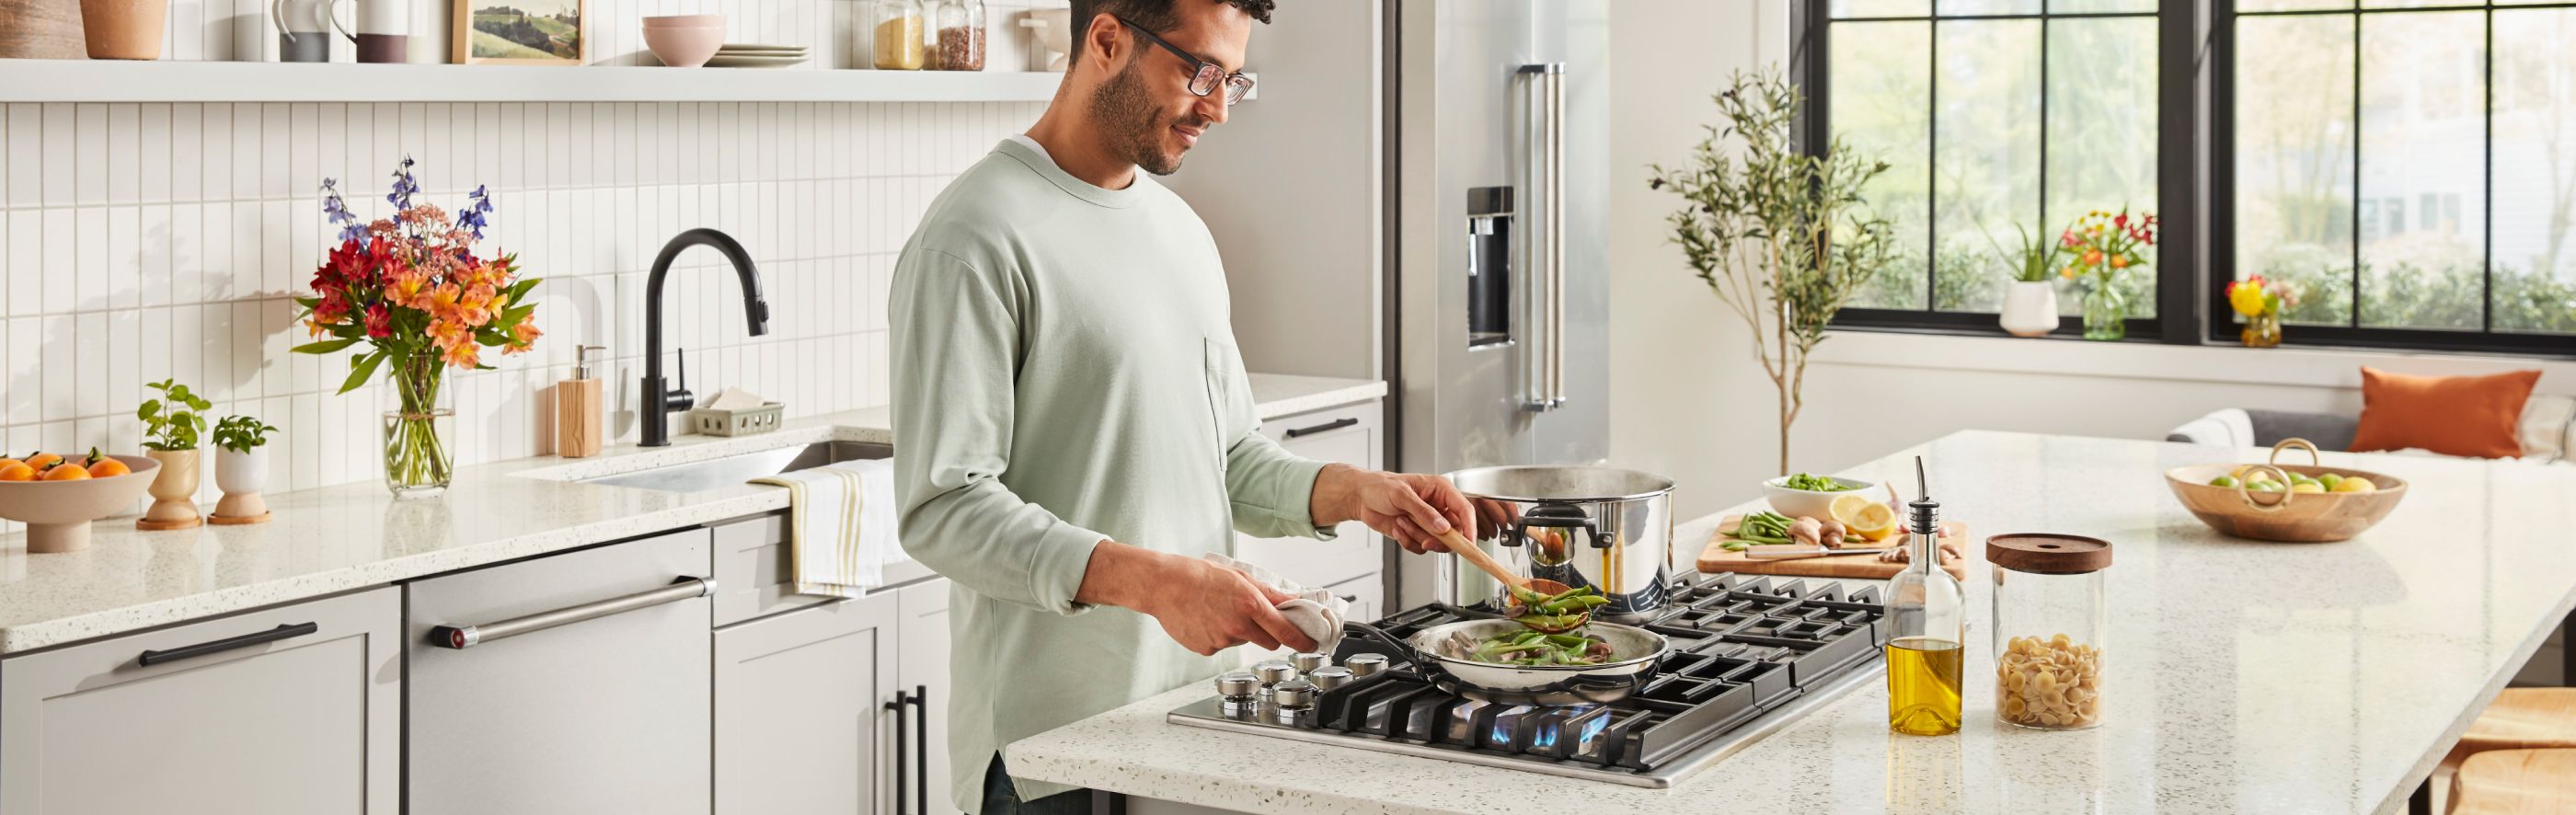 Person cooking vegetables on a kitchen island cooktop